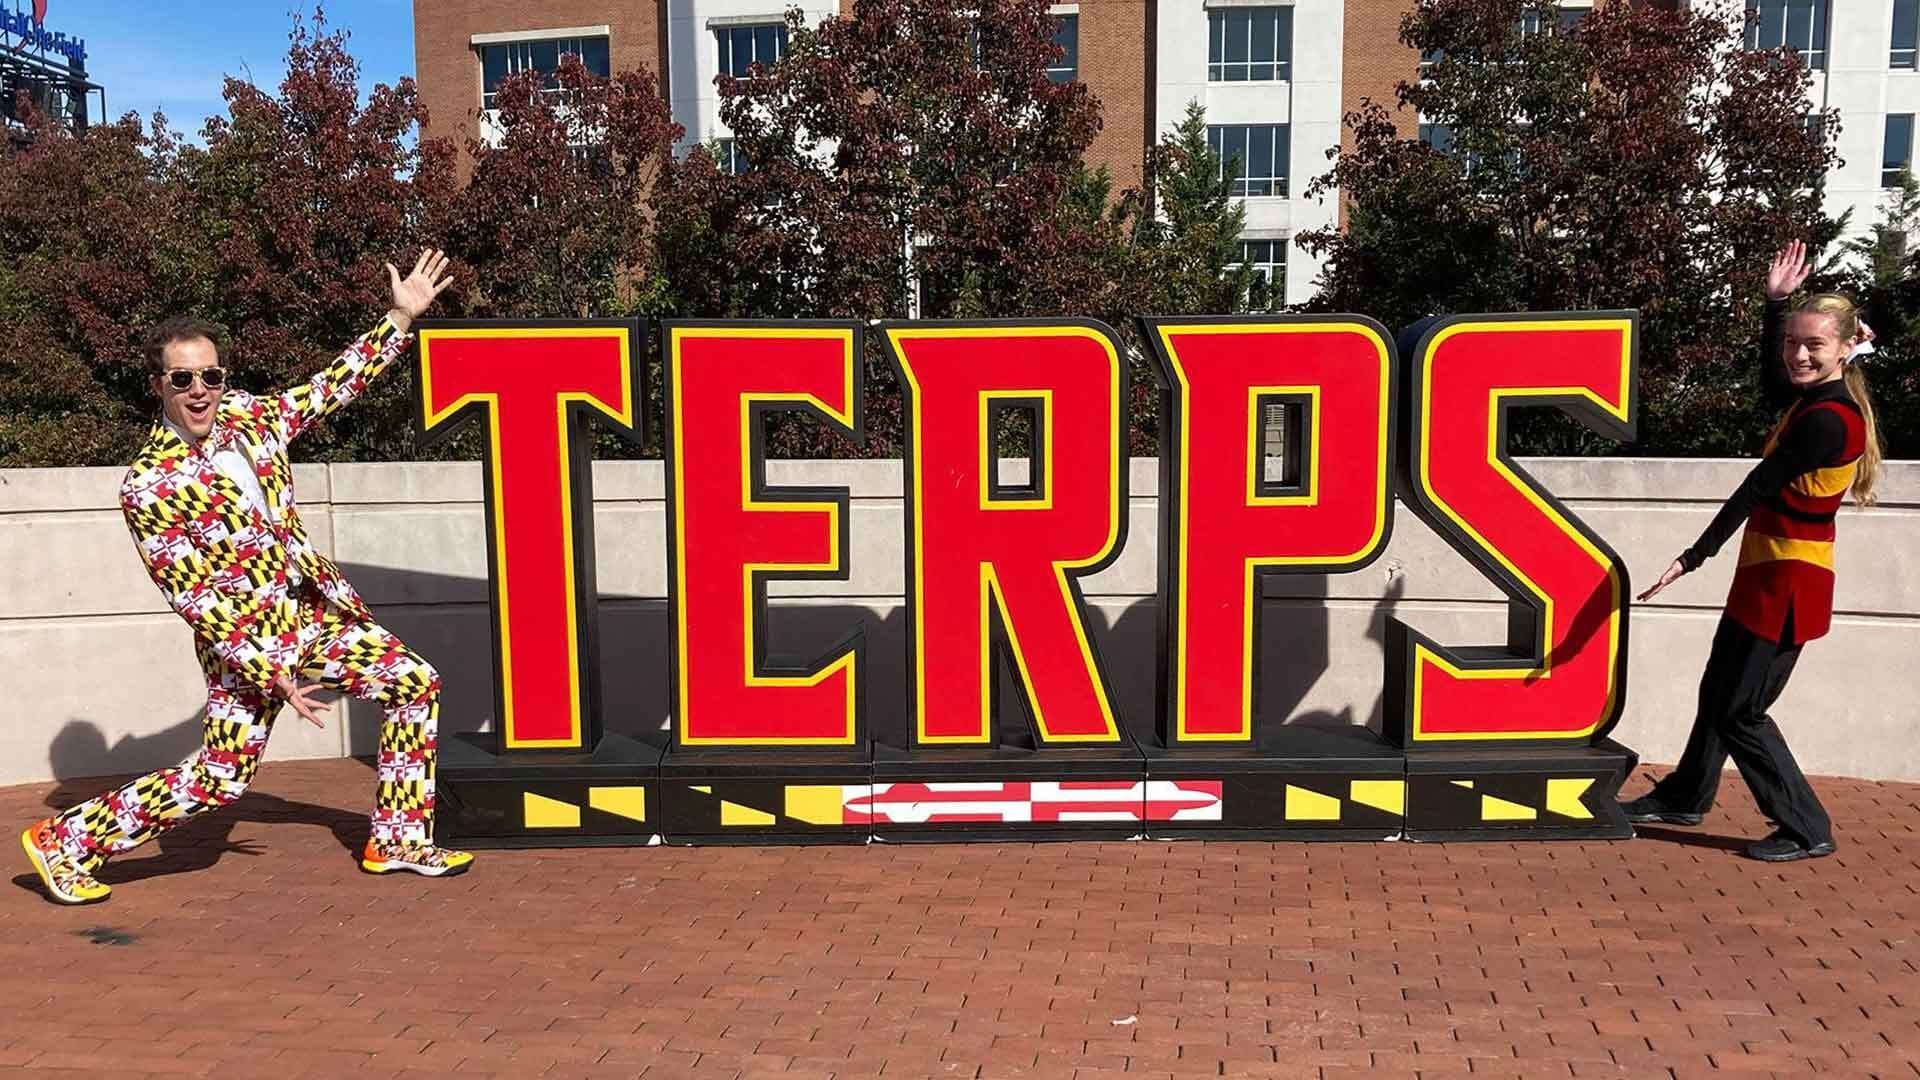 Flag Suit Guy poses next to TERPS sign